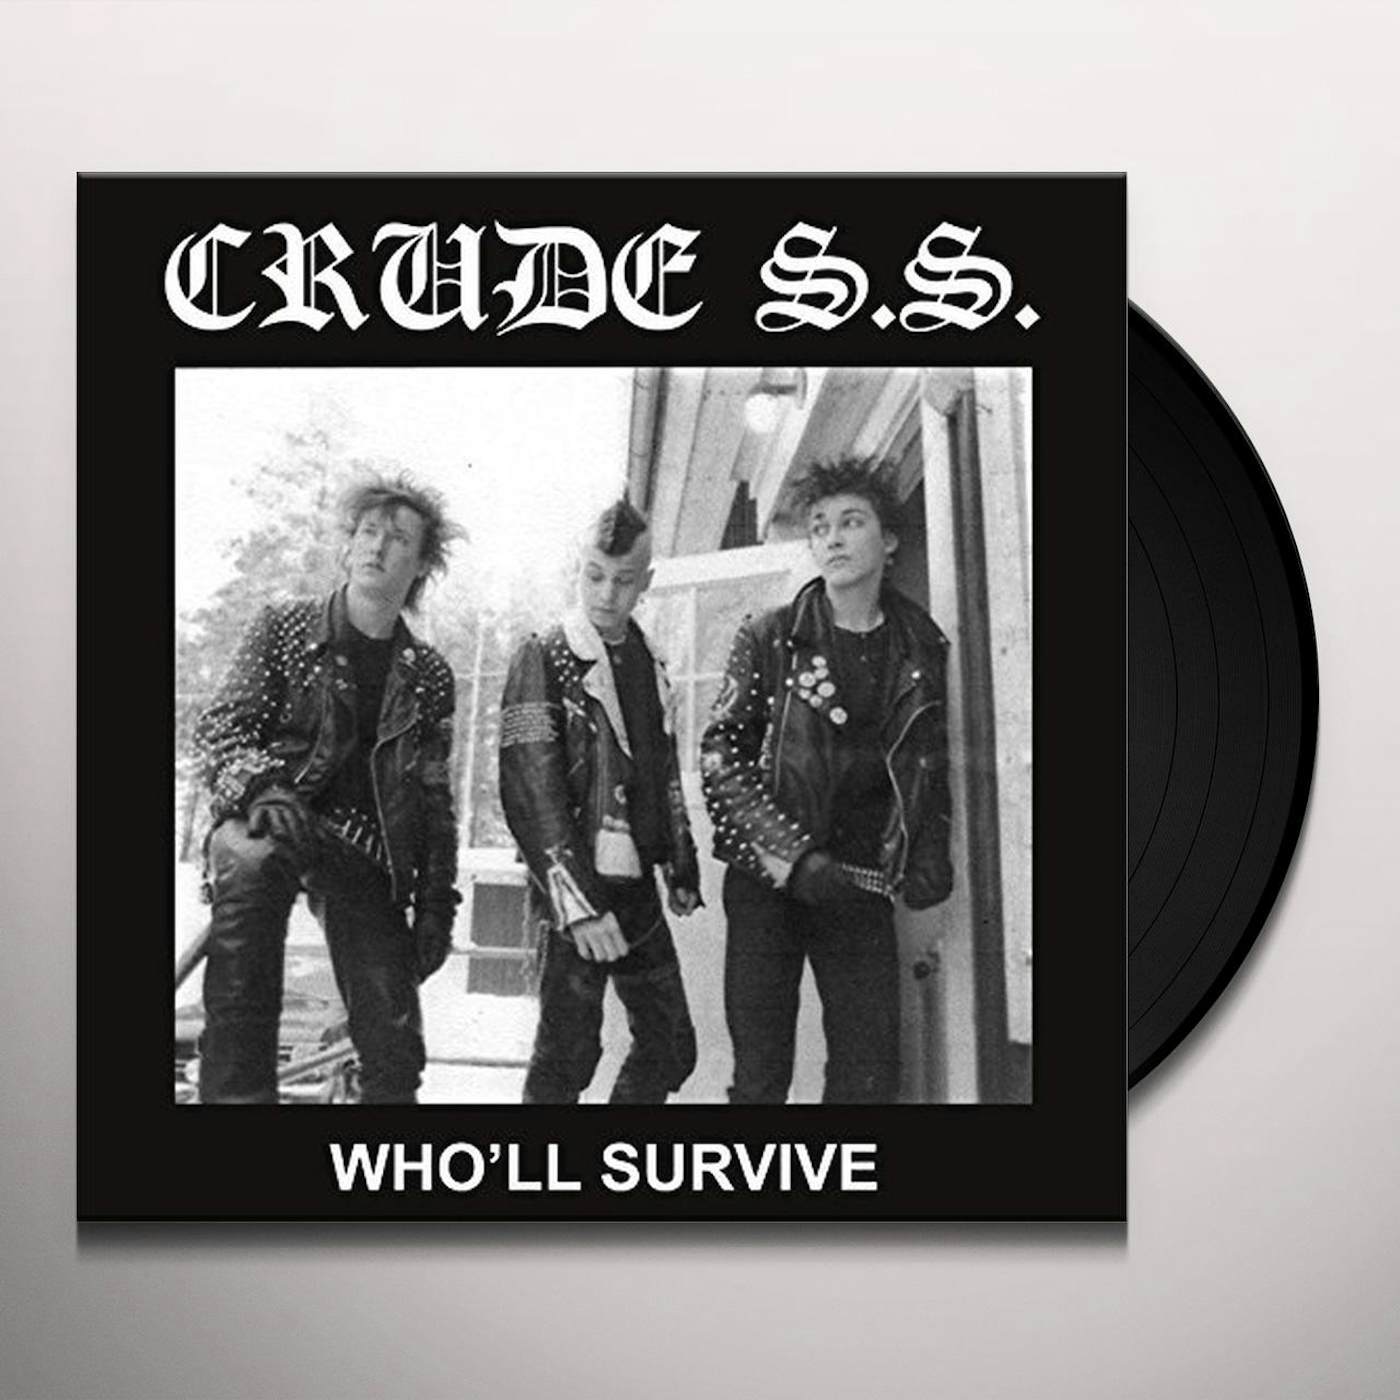 Crude SS WHO'LL SURVIVE Vinyl Record